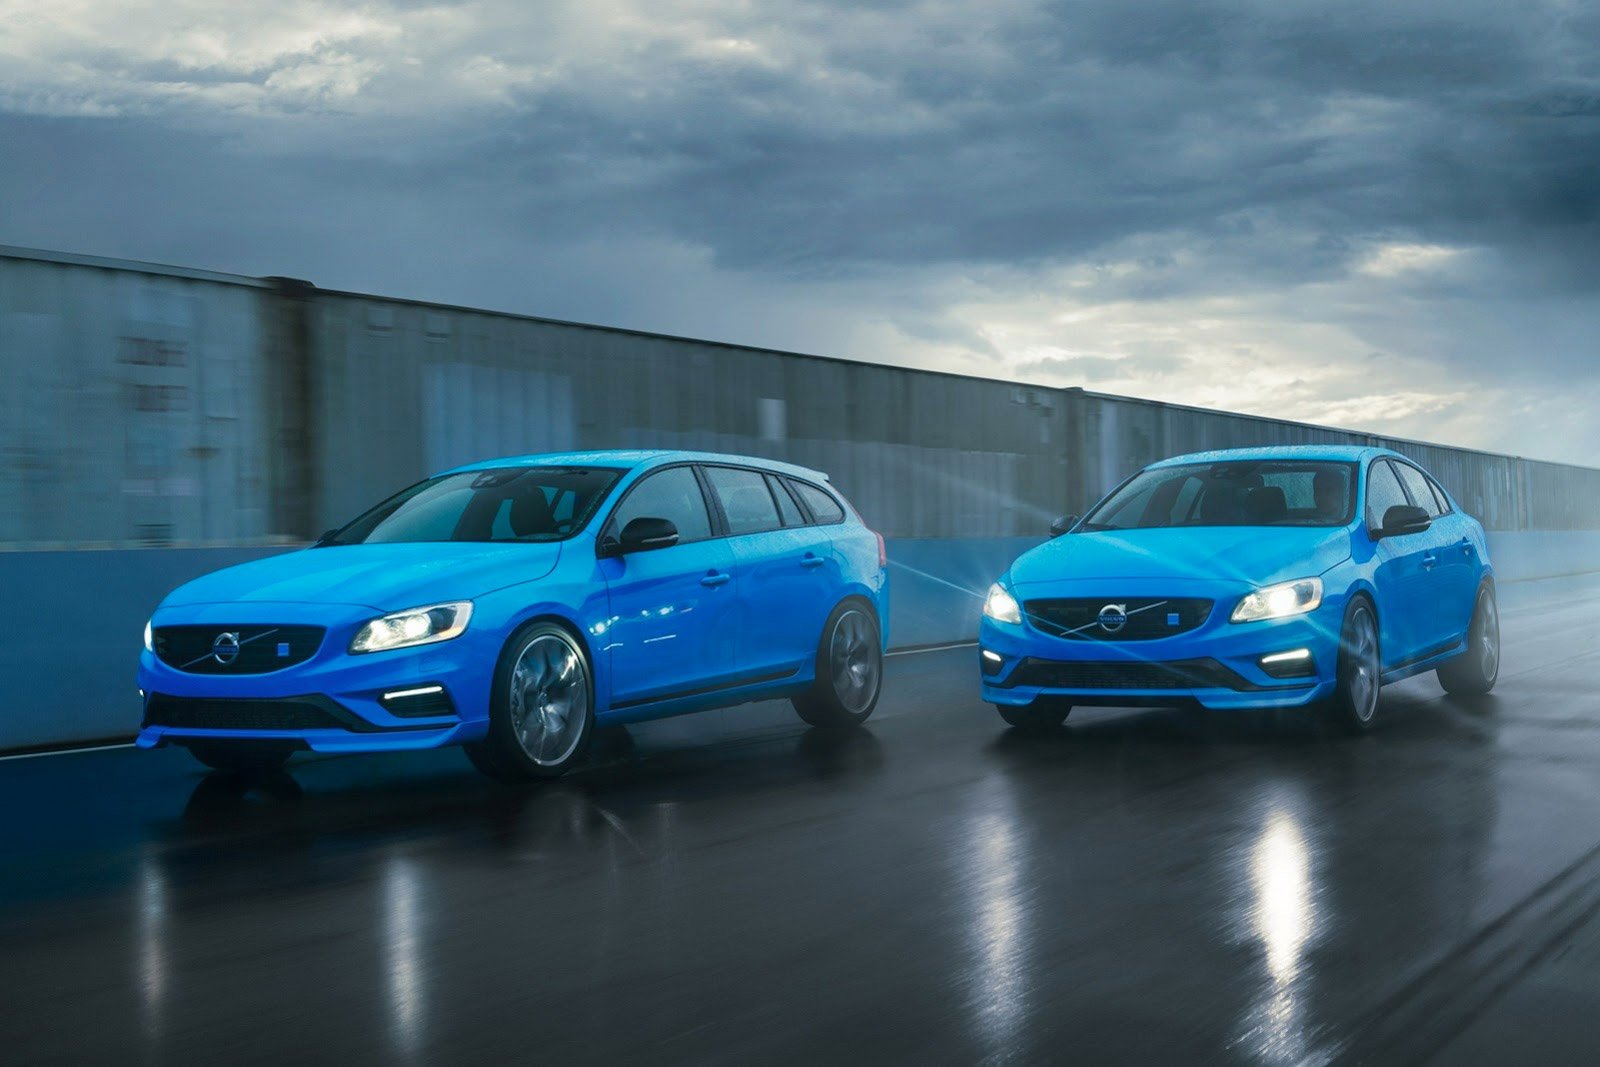 Volvo Confirms 2016 S60 & V60 Polestar Numbers for the U.S.